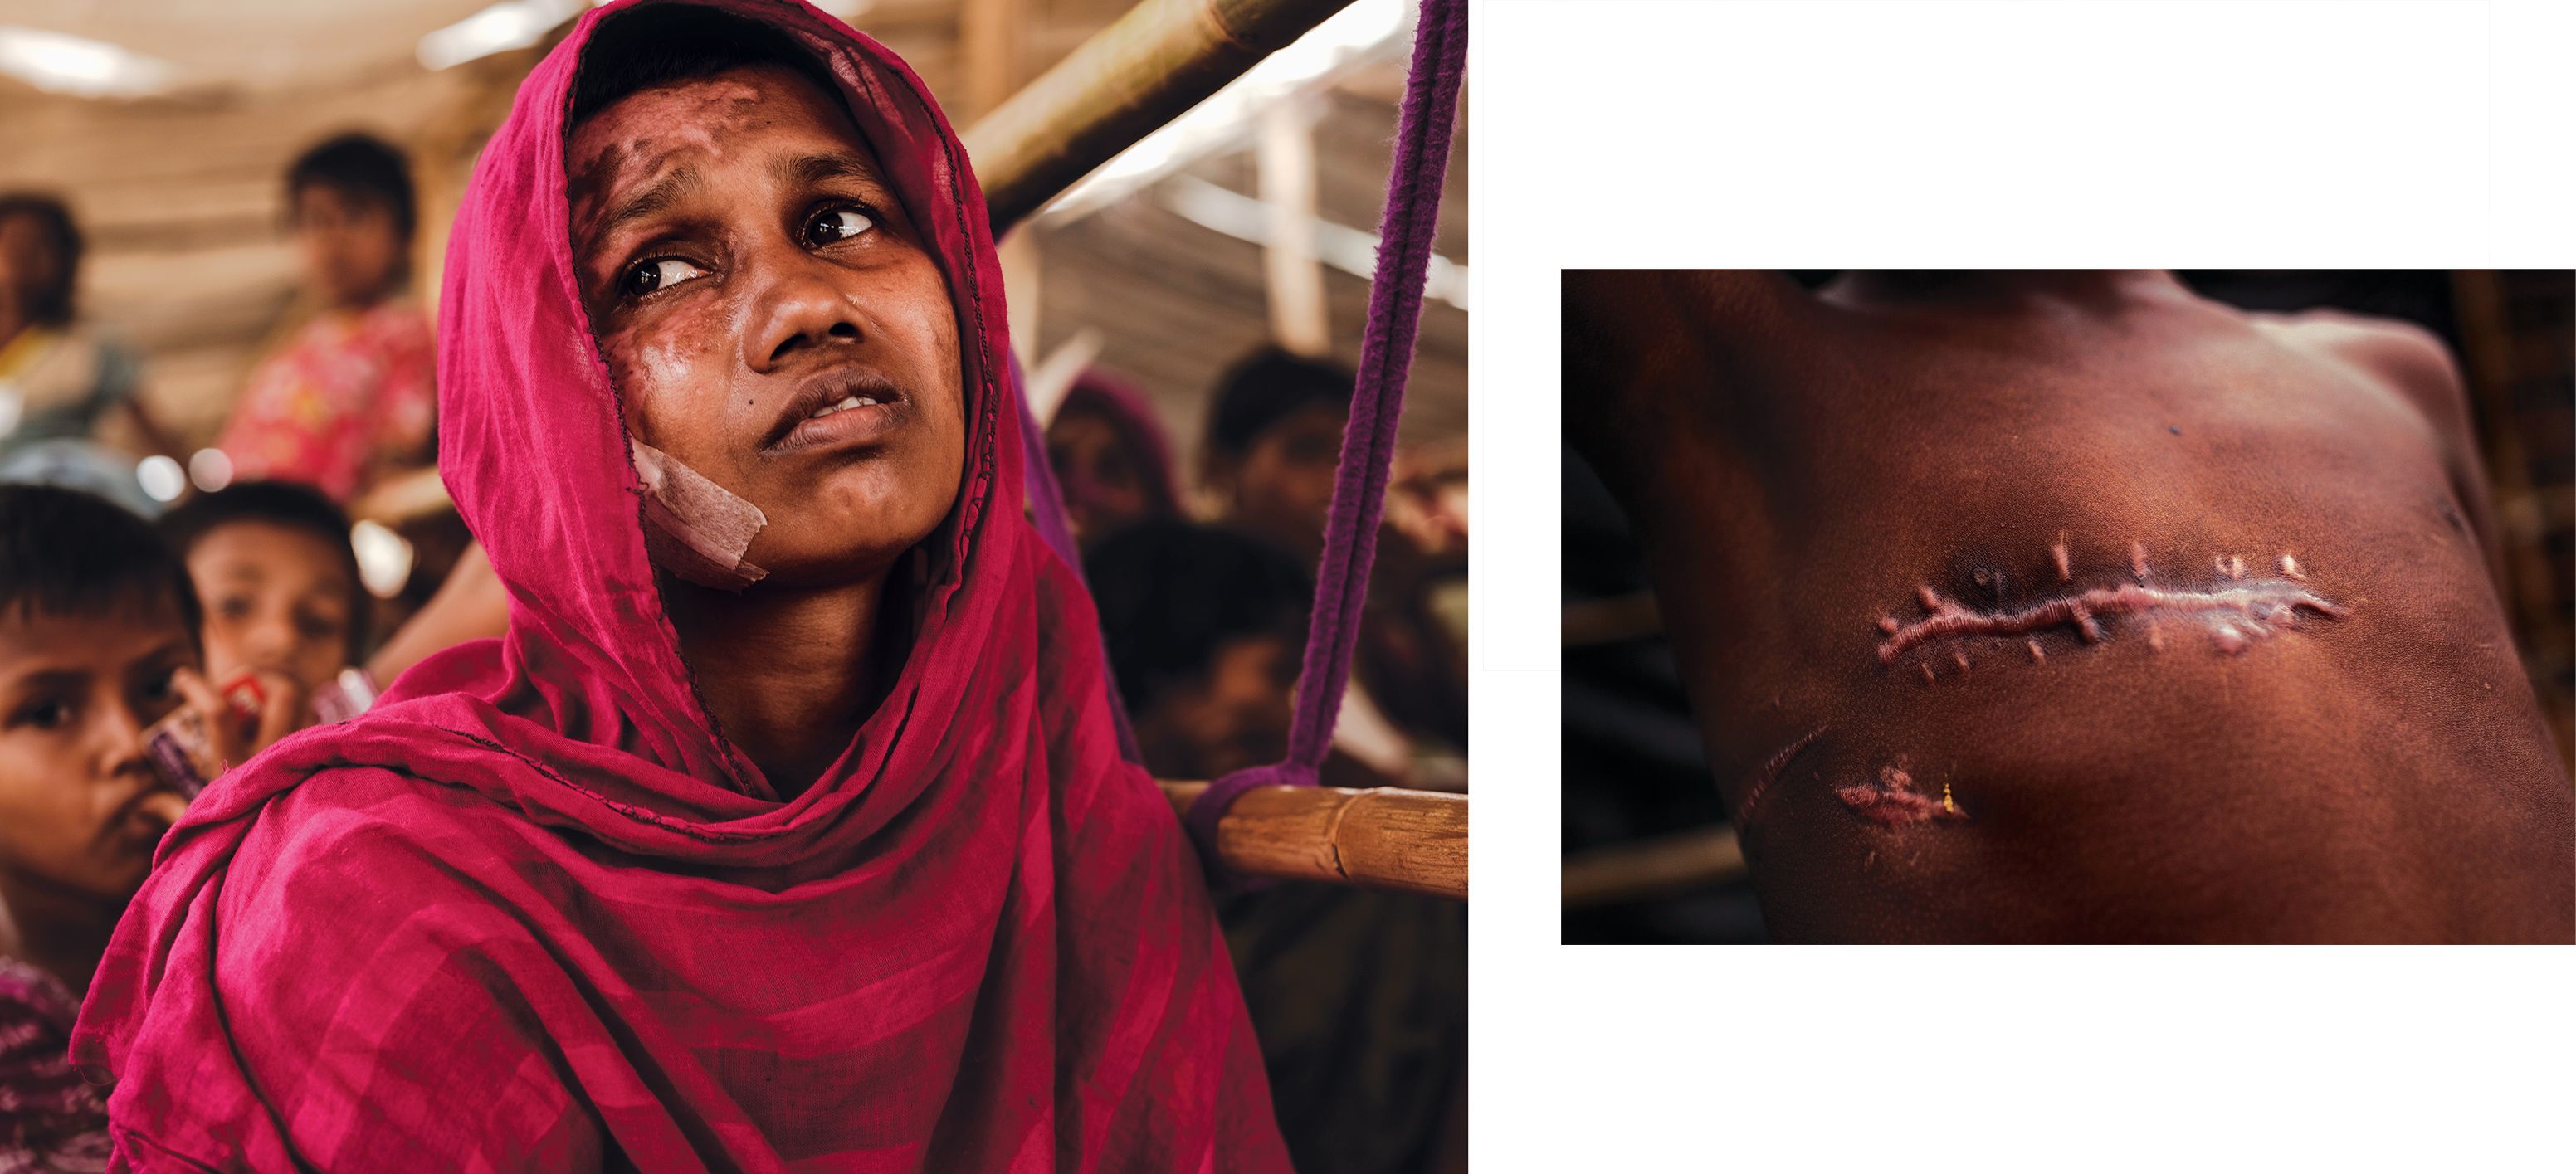 The physical evidence of atrocities is overwhelming among survivors in the refugee camps. Momtaz Begum (left) was treated for burns to her face and body. Seven year old Mohammad Shohail was shot in the chest. Image by Patrick Brown/Panos Pictures/UNICEF. Bangladesh, 2017.